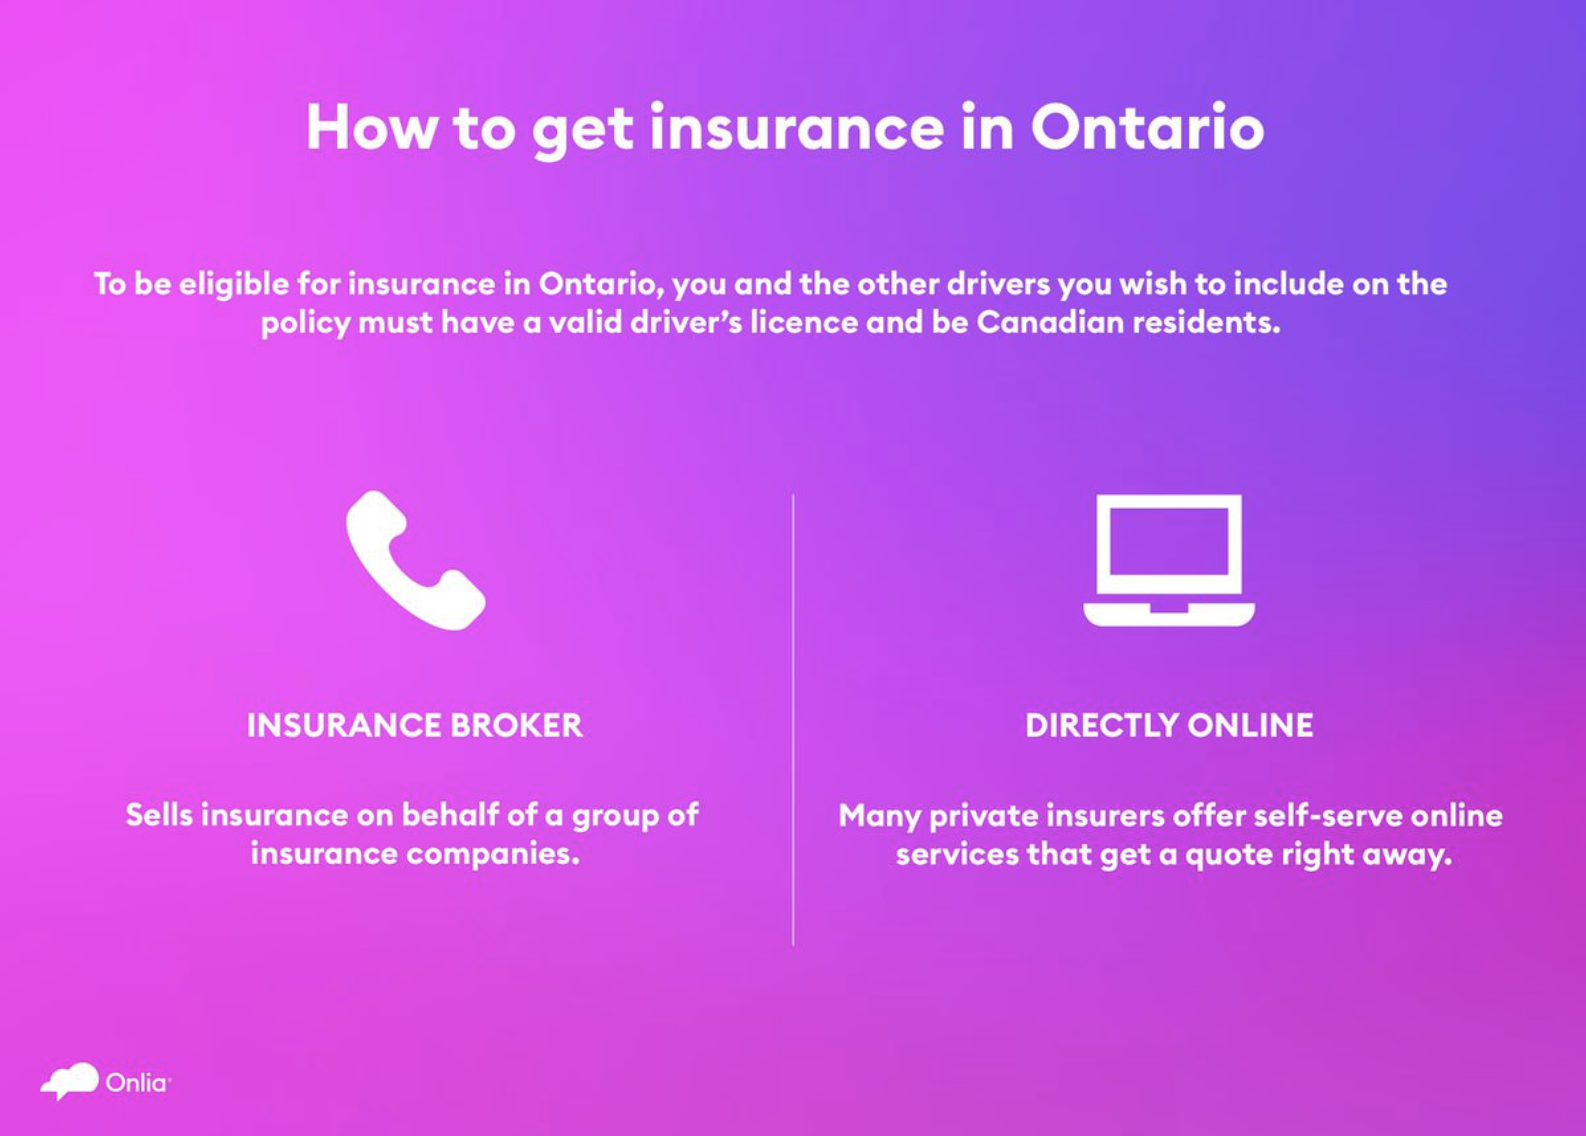 How to get insurance in Ontario